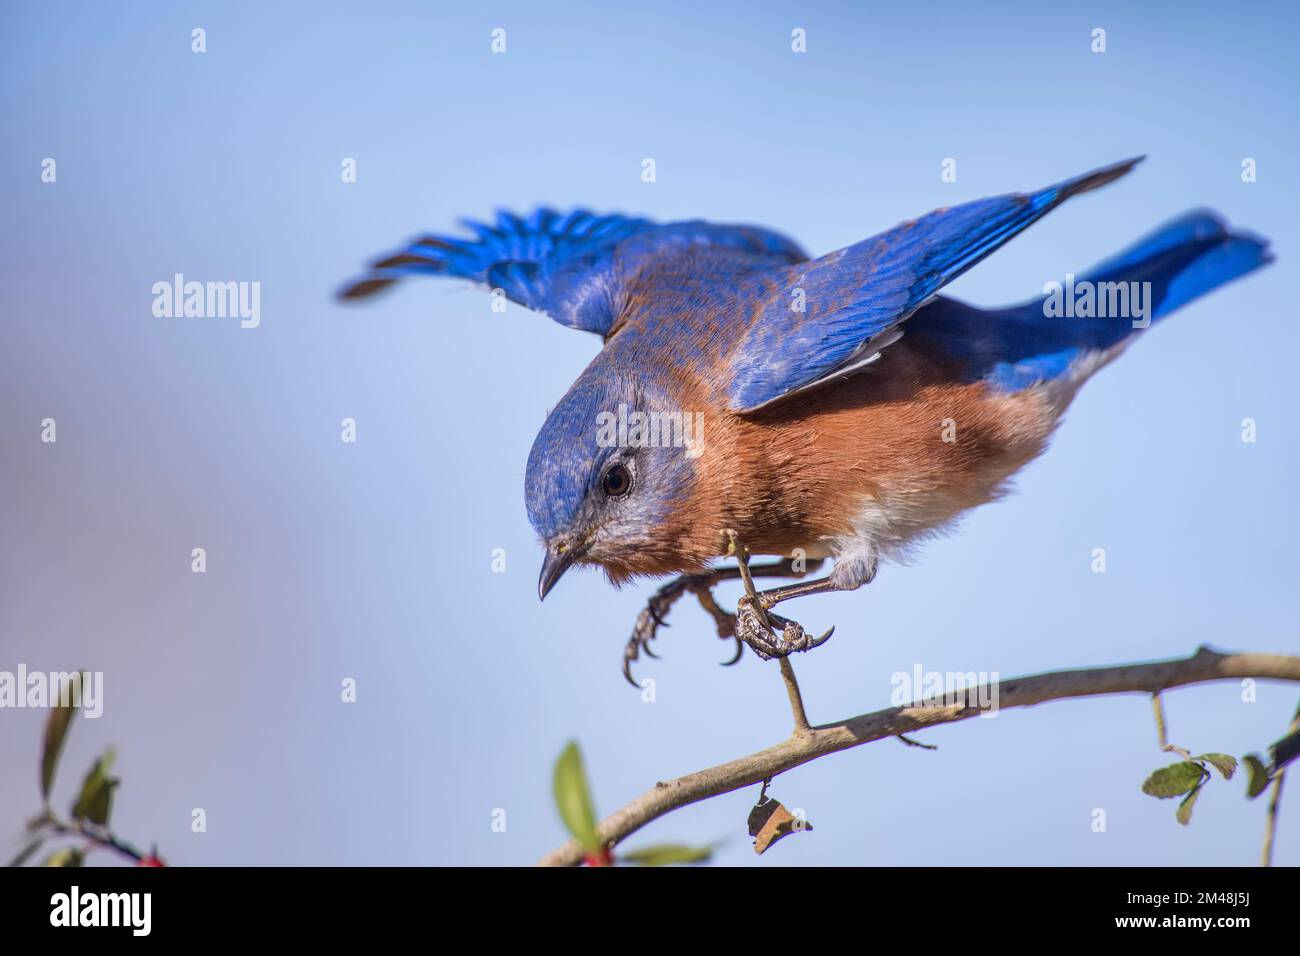 Male Eastern Bluebird Balancing on Slender Branch with Its Wings Stretched Outward Stock Photo